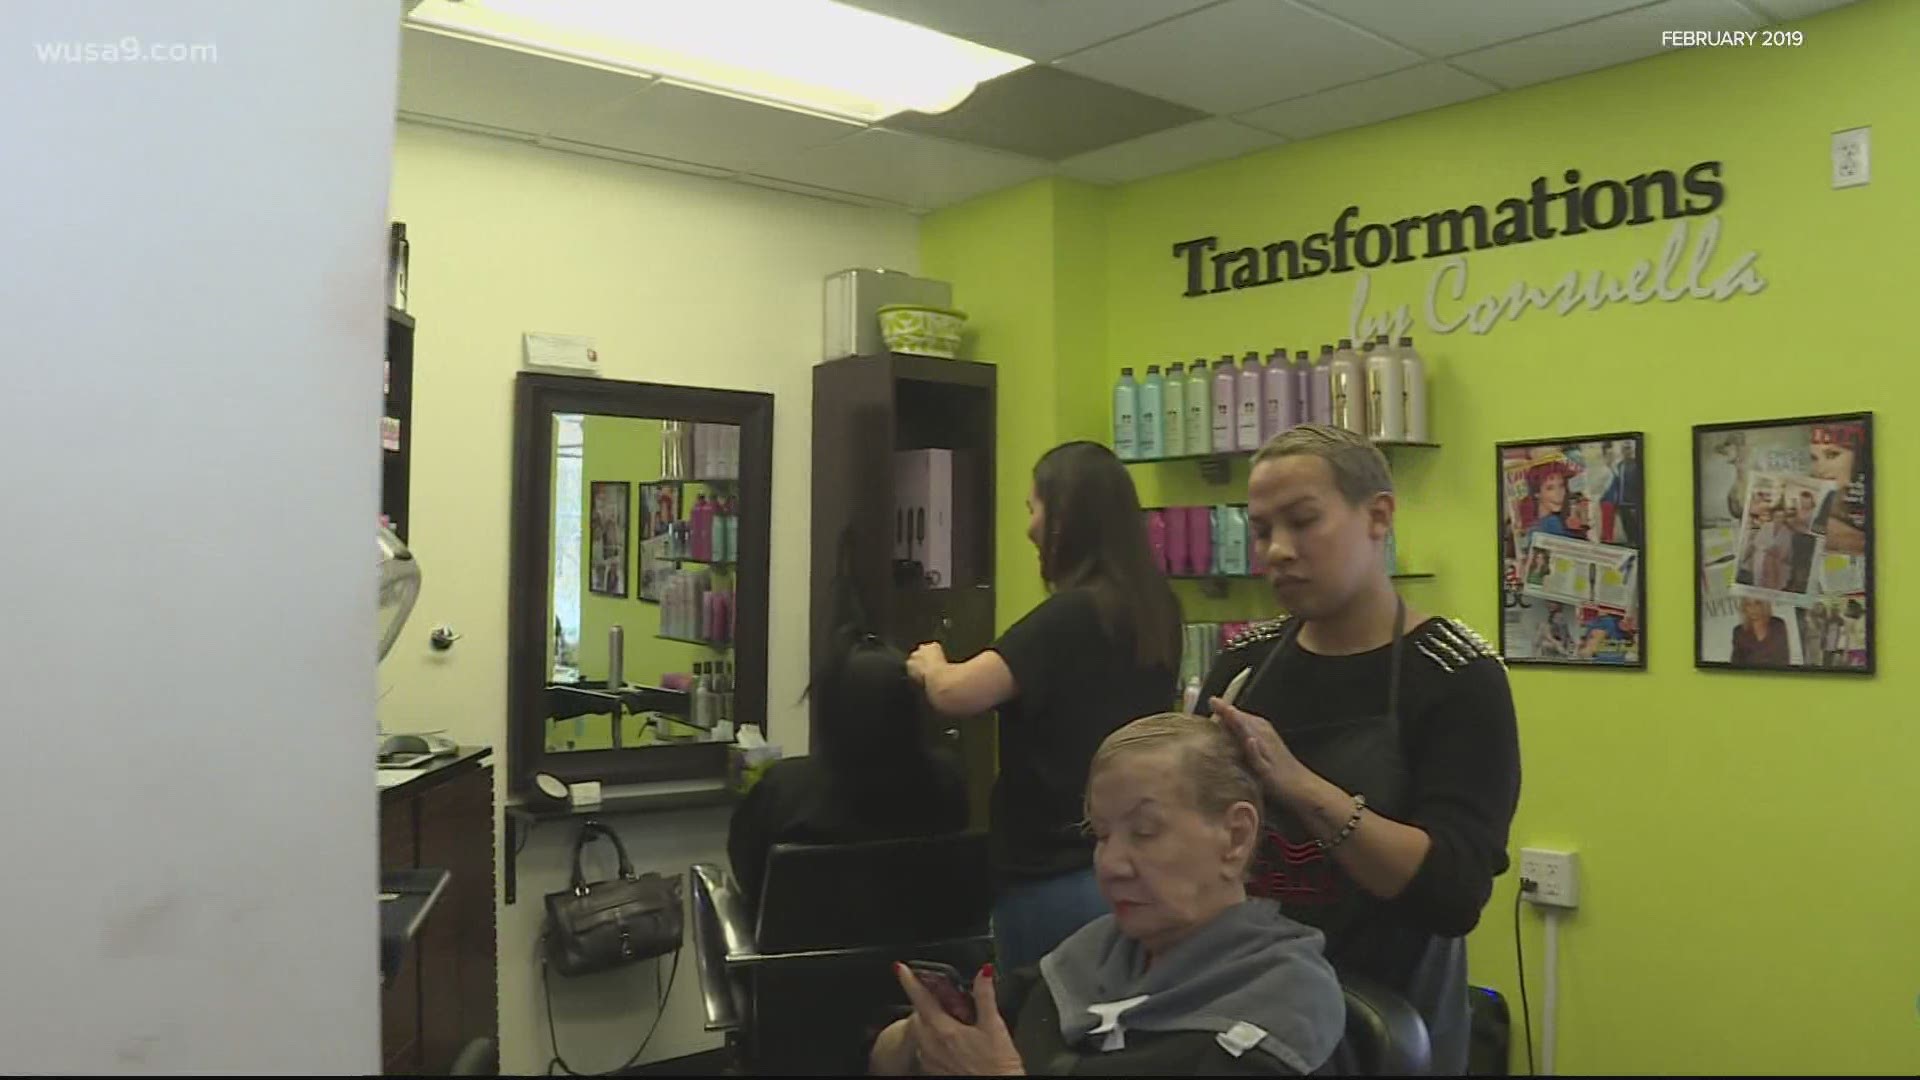 WUSA9's Delia Goncalves explores who hairstylists and barbers in Maryland are responding to being able to serve clients who are essential workers.